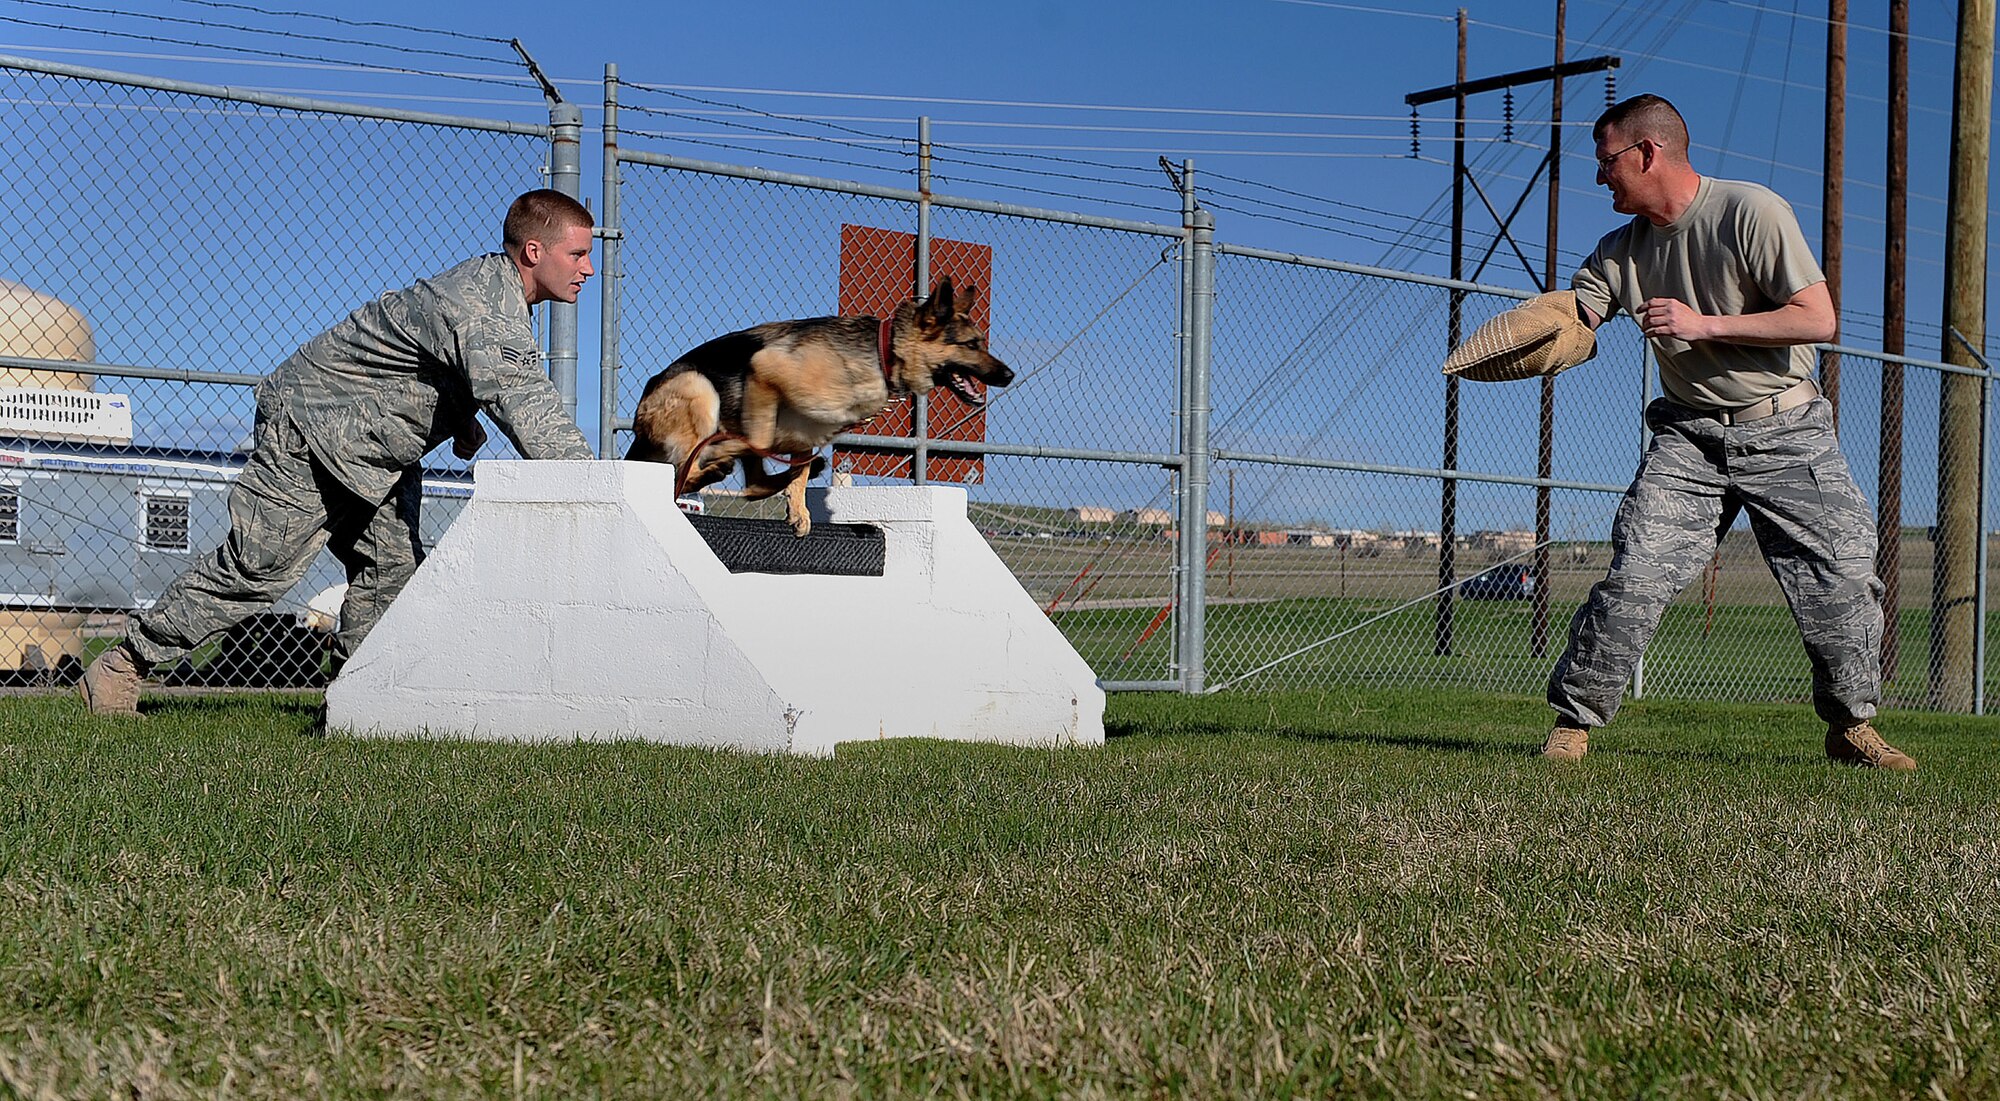 (Left) Senior Airman William Knight, 28th Security Forces Squadron dog handler, watches Rex, 28 SFS military working dog, chasing after a simulated attacker during aggression training in the obstacle course, here, May 6. Dog handlers perform training with their dogs daily to ensure deployment and real world readiness. (U.S. Air Force photo/Airman 1st Class Joshua J. Seybert)